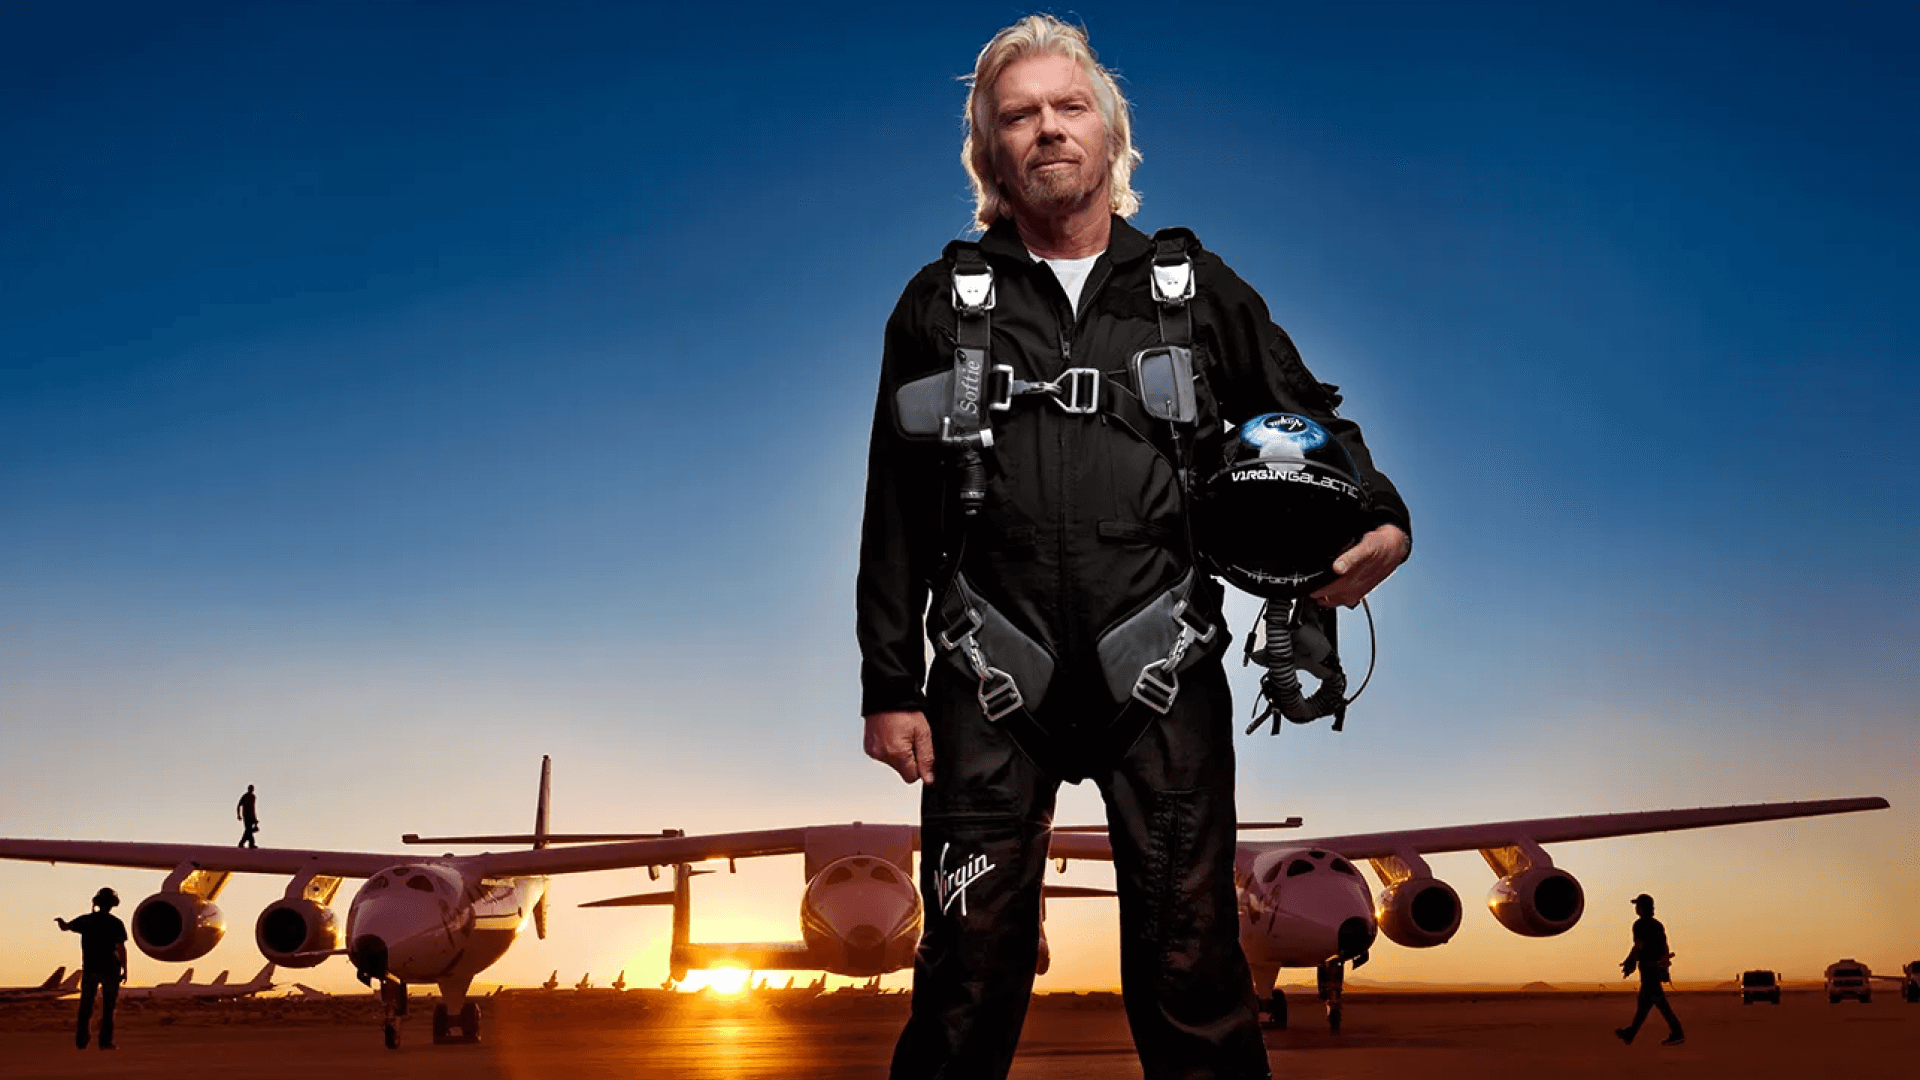 Richard Branson in a space suit with Virgin Galactic